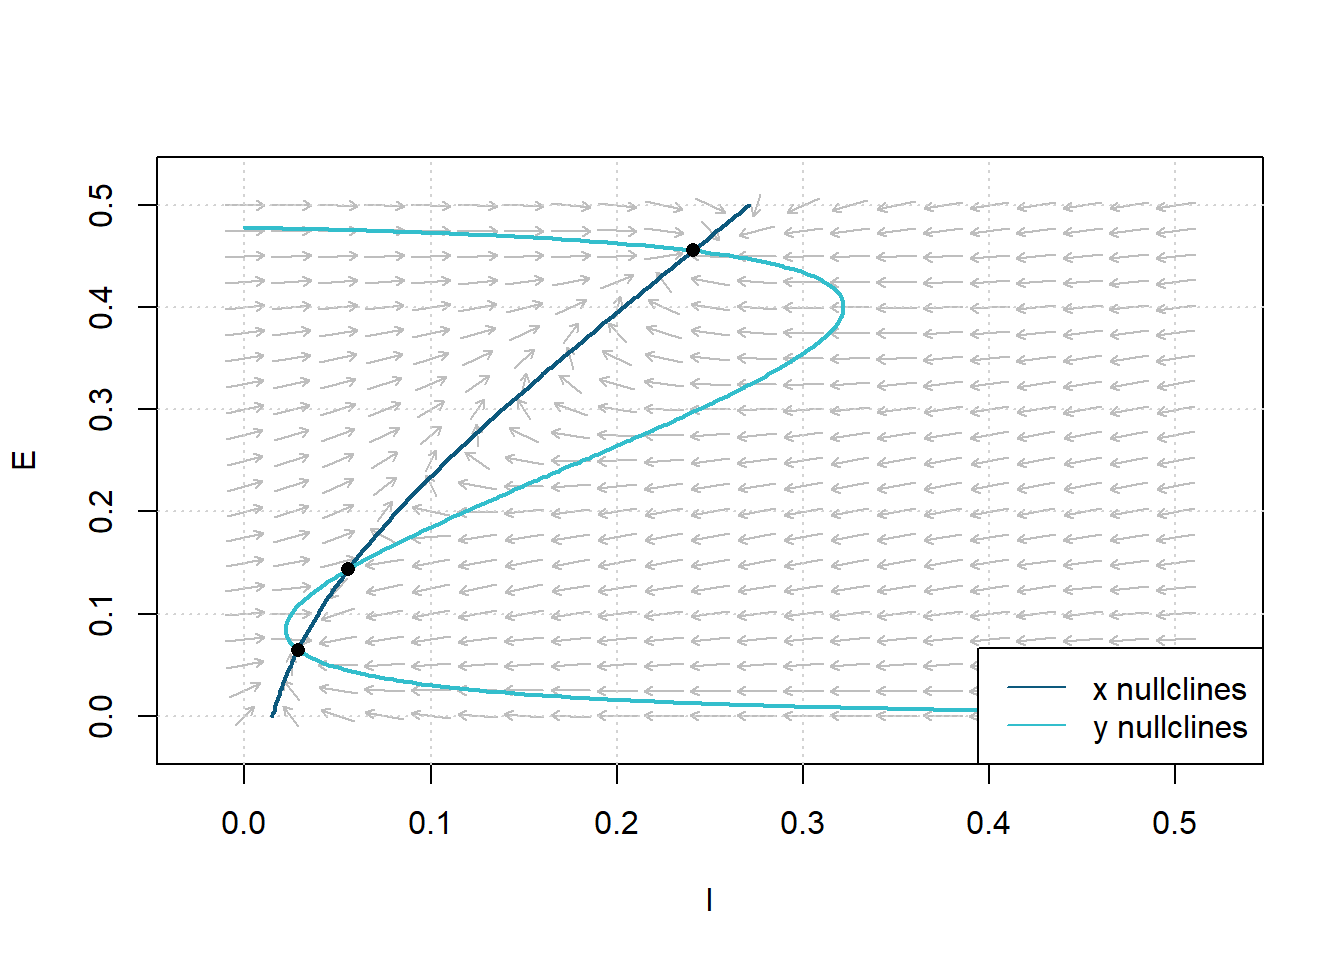 Figure  8: Plot of the Equilibrium Points (Steady State solutions) satisfying Theorm 1. Dashed lines are isoclines. Parameters:$c_1=12$, $c_2 = 4$, $c_3= 13$, $c_4=11$, $a_e=1.2$, $\theta_e=2.8$, $a_i= 1$, $\theta_i = 4$, $r_e =1$, $r_i=1$, $P=0$, and $Q=0$.